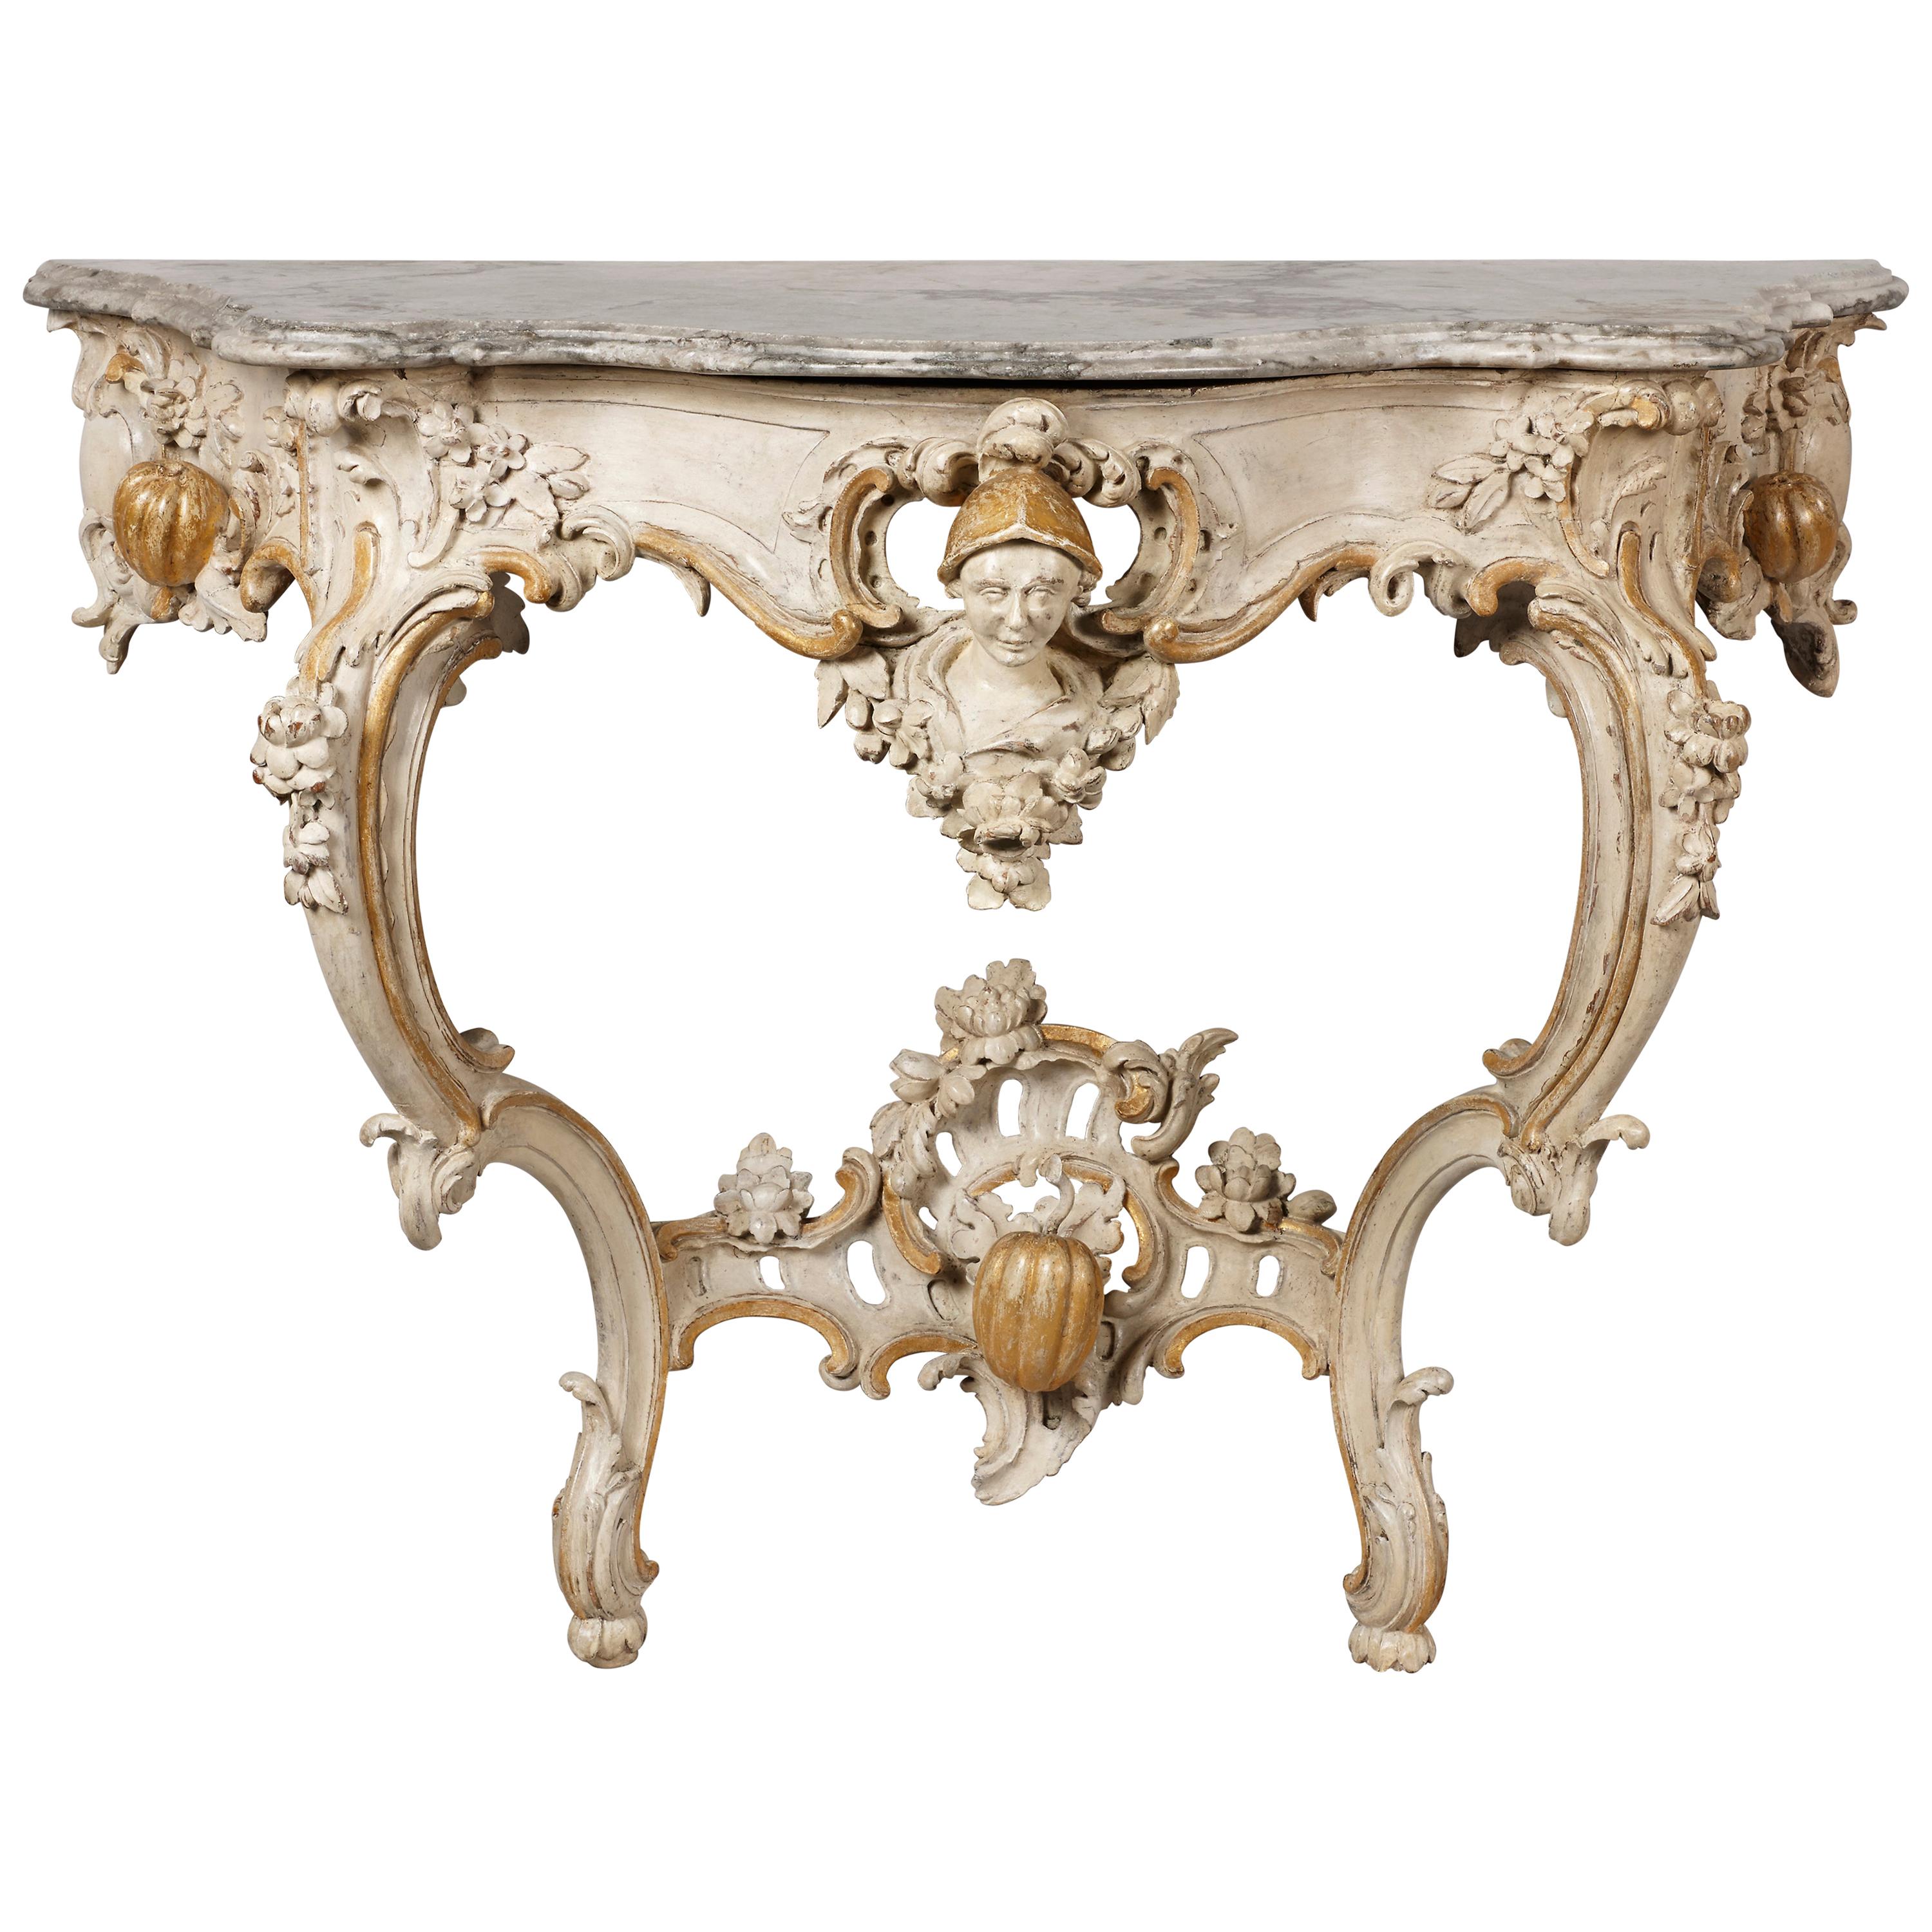 South German White Painted Rococo Console Table, Mid-18th Century